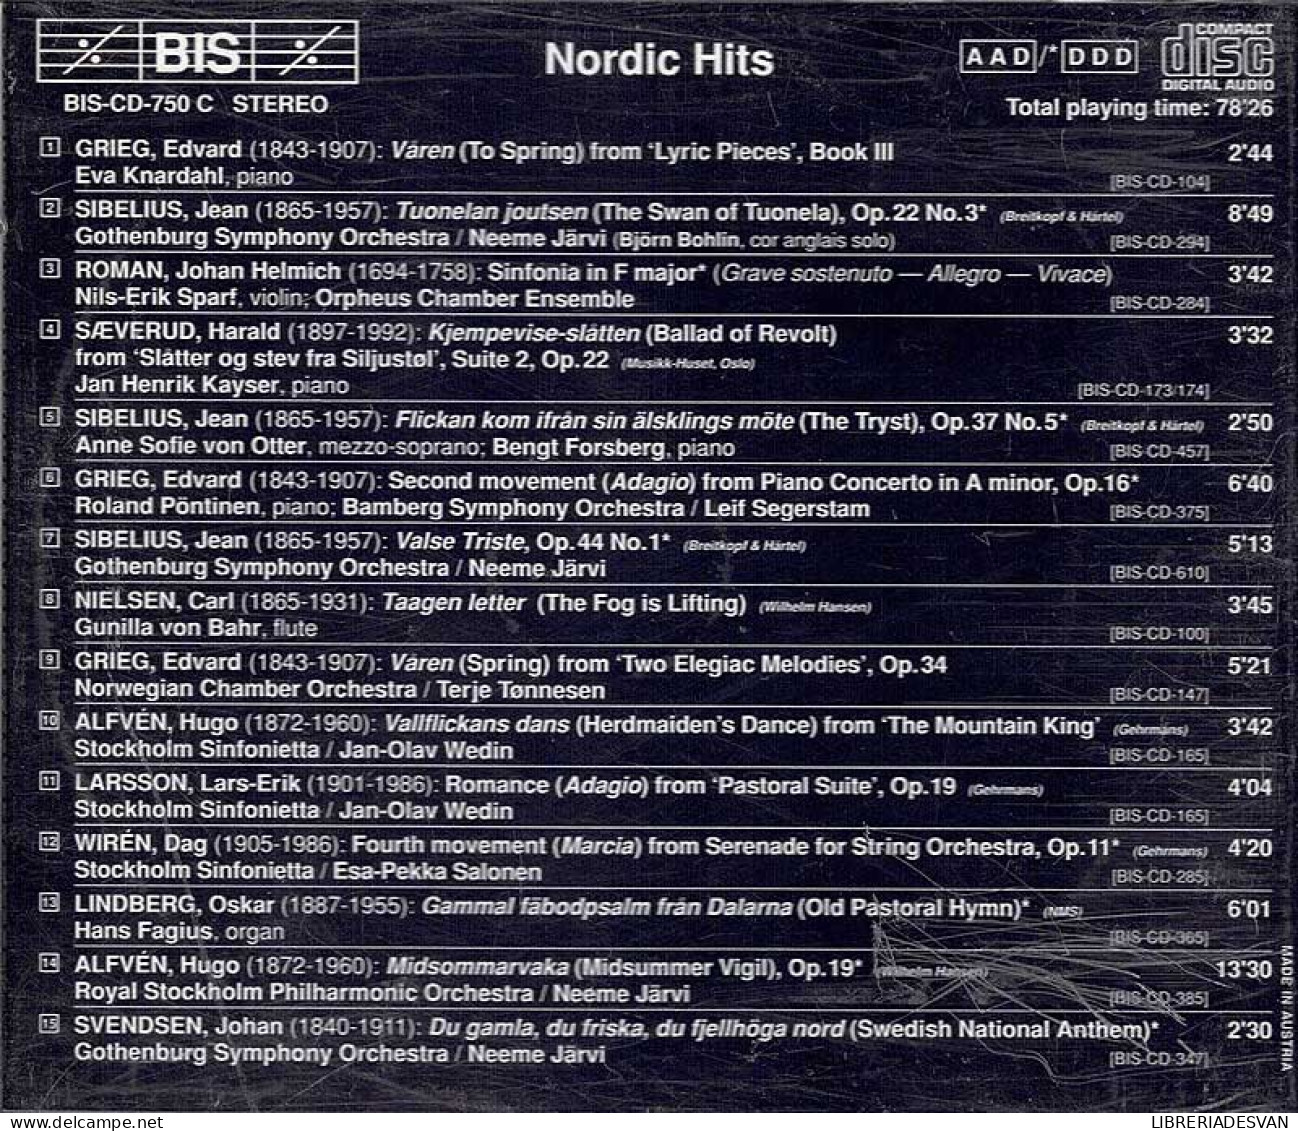 Your Favourite Classics Disc 3. Nordic Hits. CD - Classical